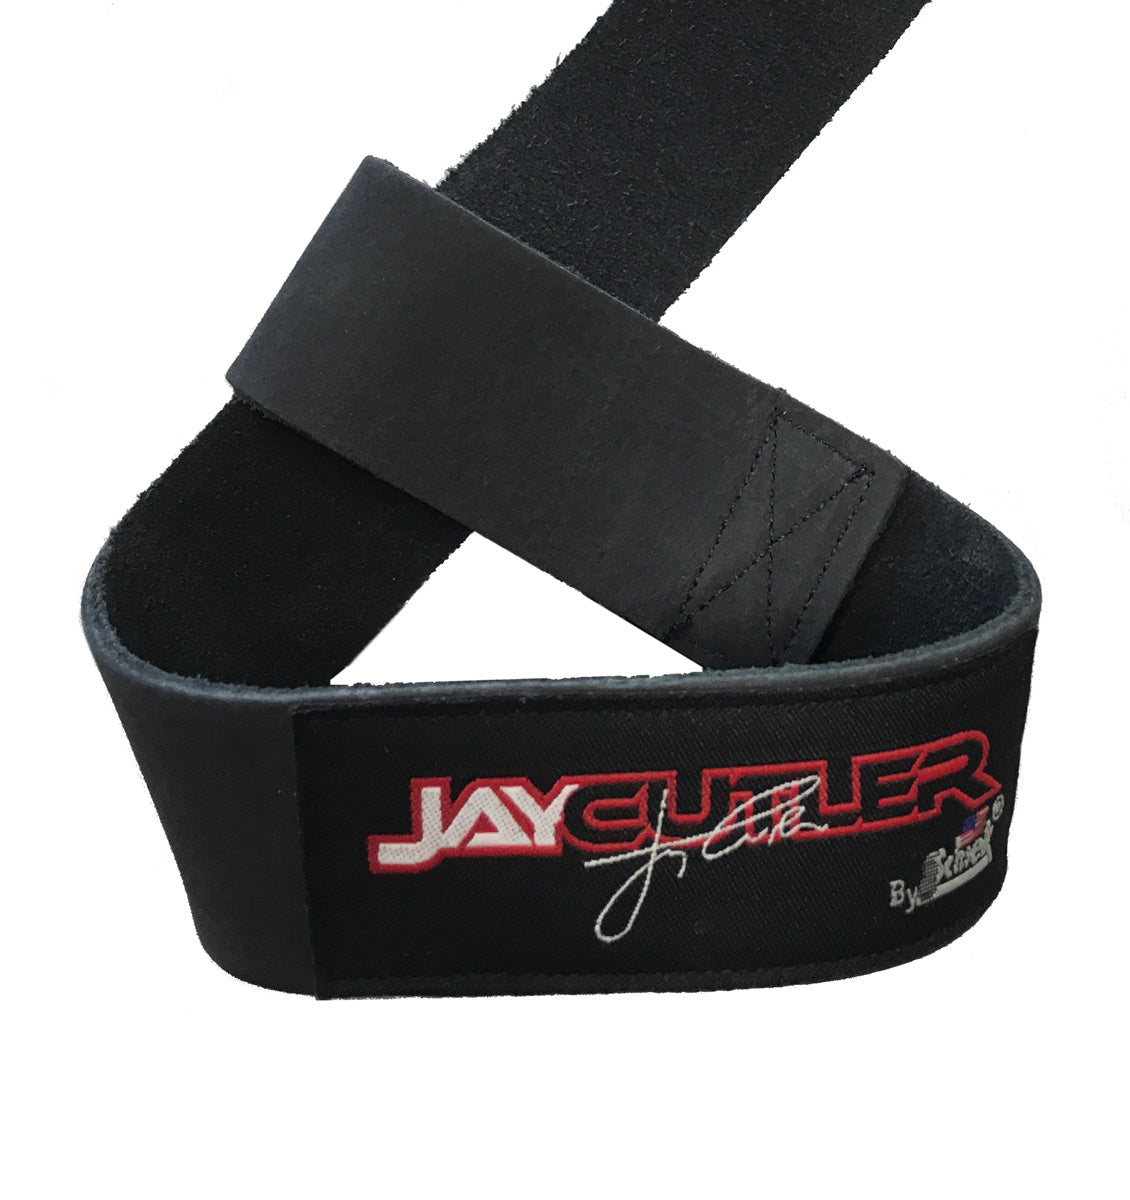 Jay Cutler Leather Lifting Straps by Schiek - 2